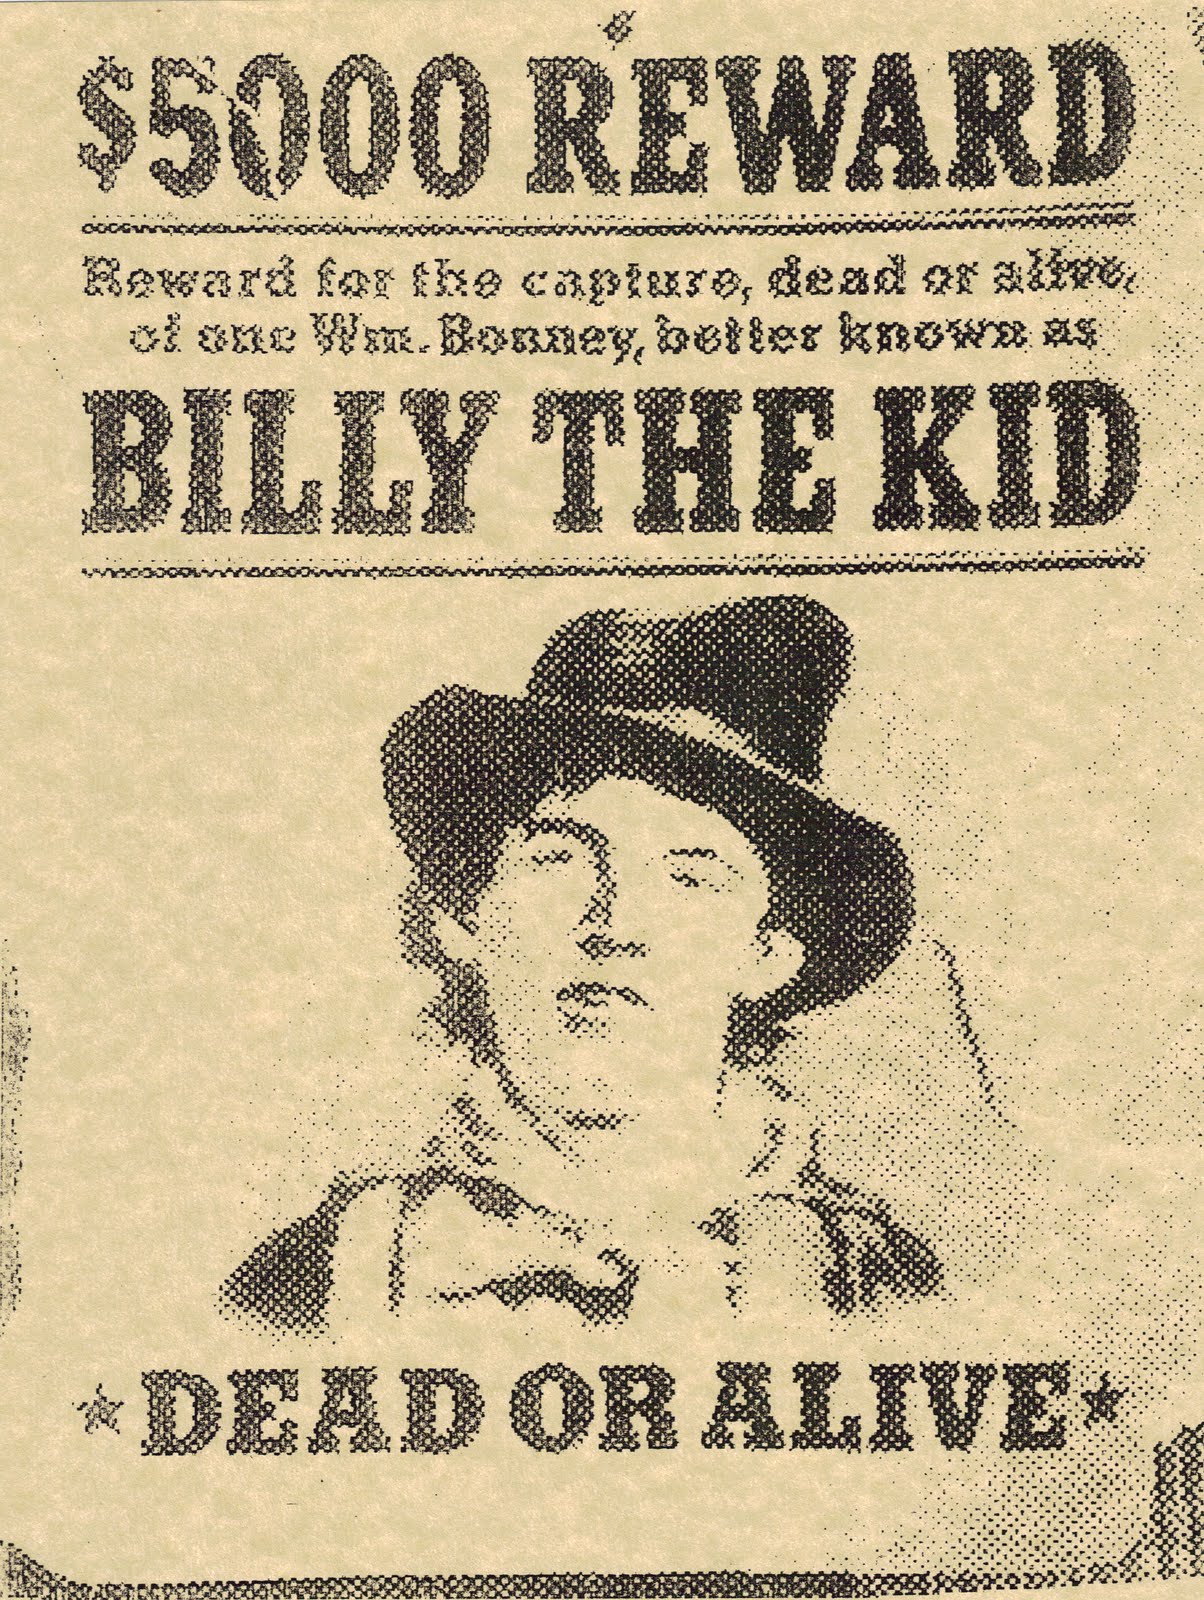 Amazing Billy The Kid Pictures & Backgrounds